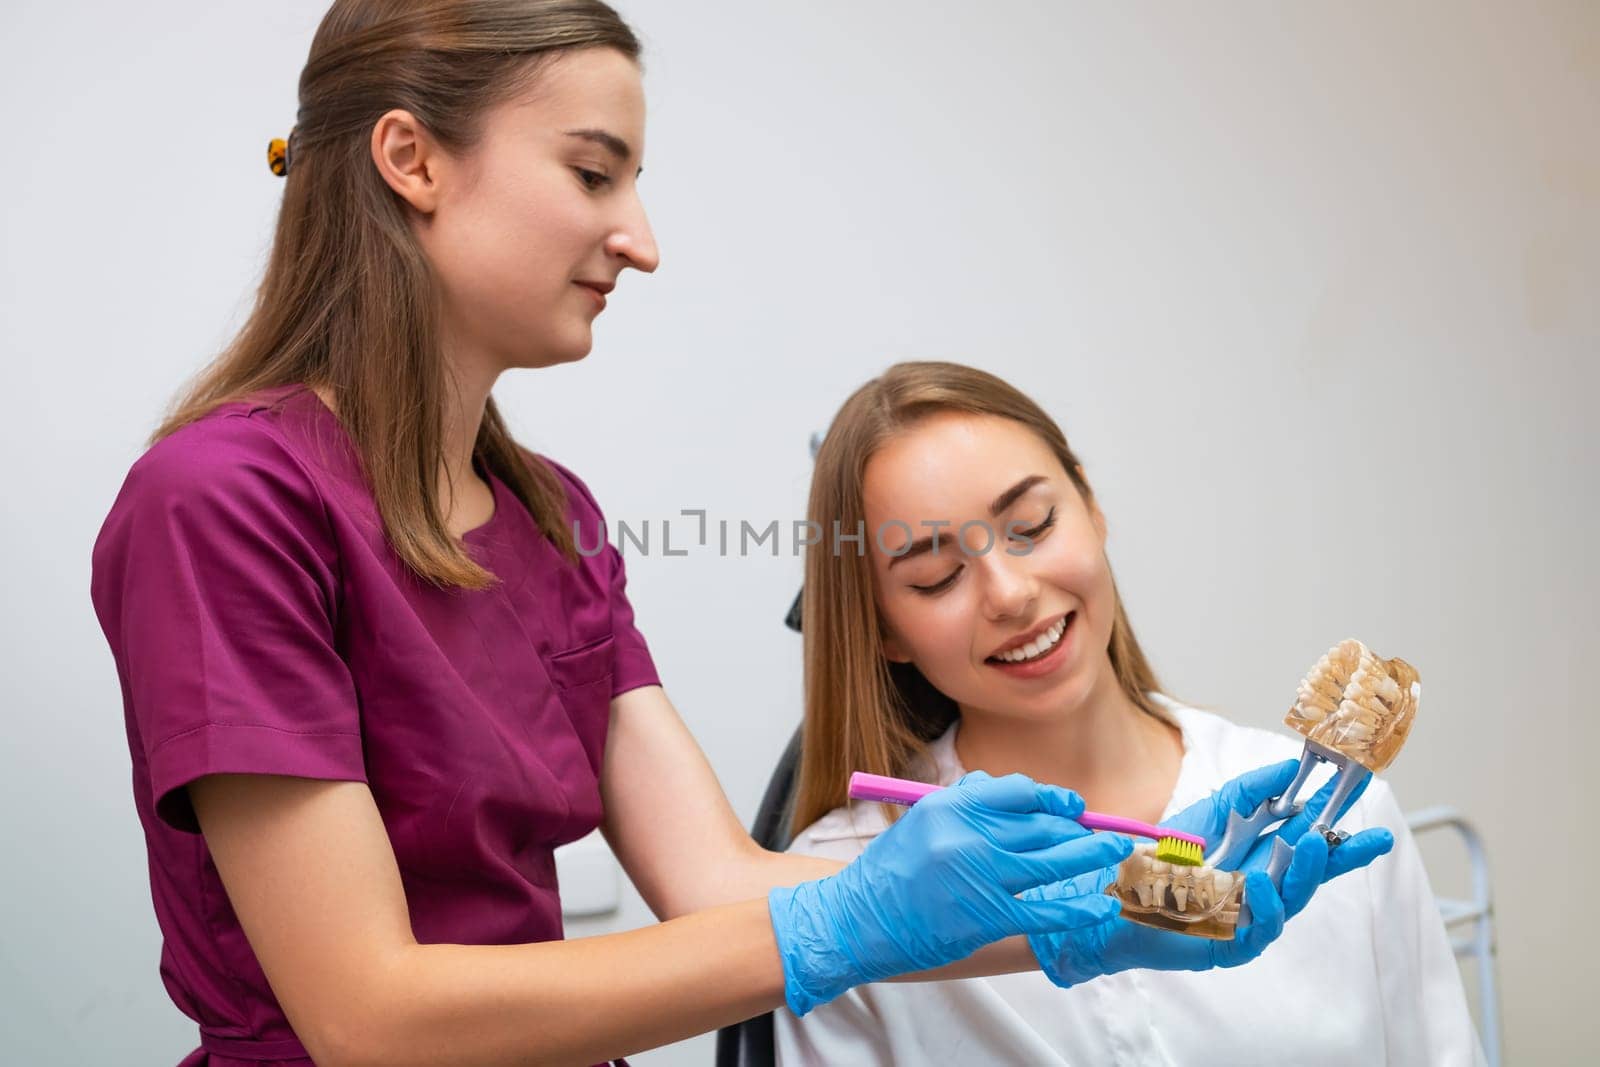 A dental hygienist provides demonstration to woman on the proper technique for cleaning teeth. by vladimka